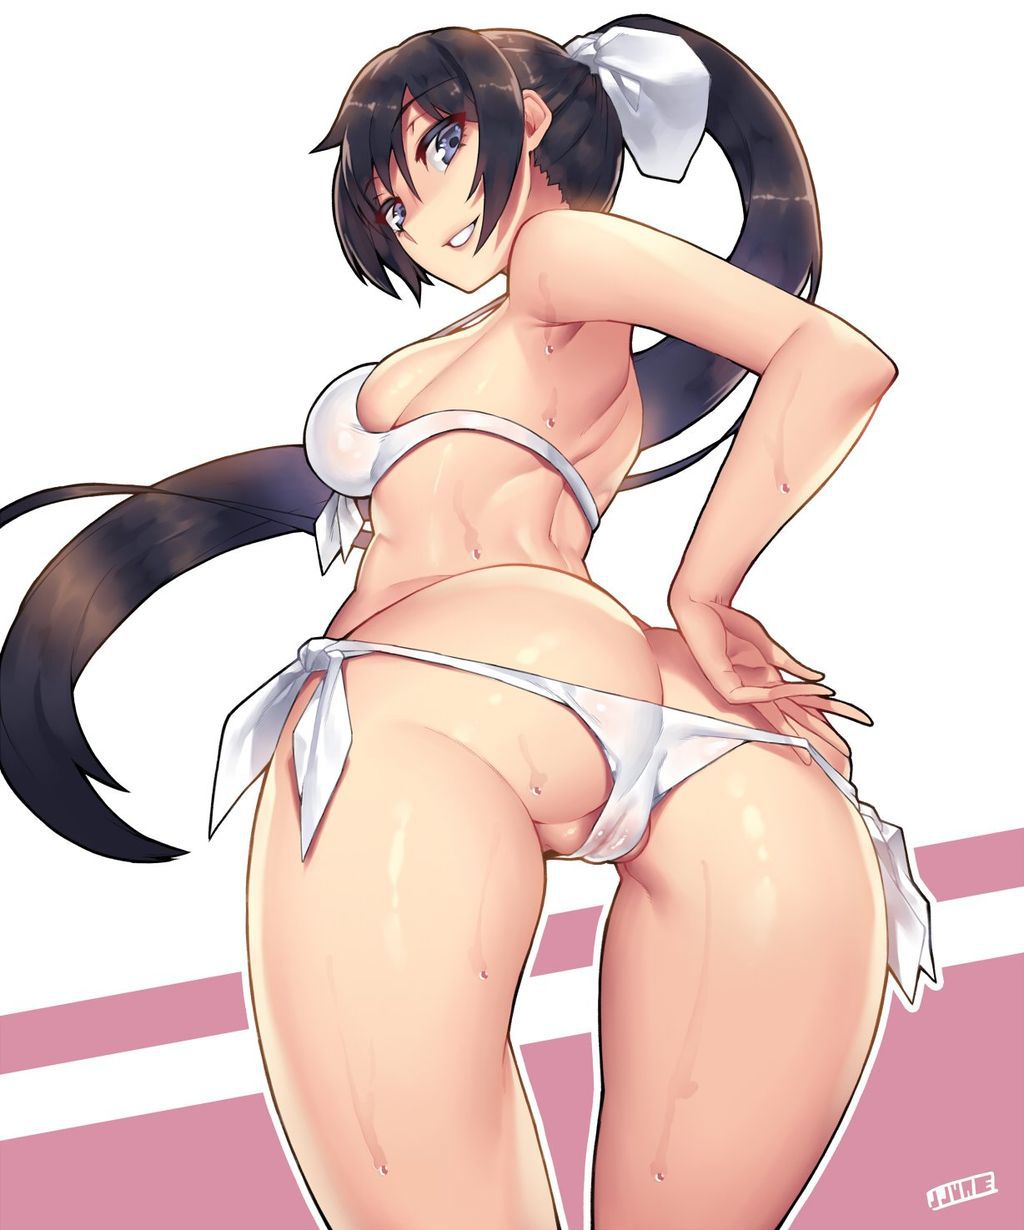 [2nd] Second erotic image of cute ponytail daughter 2 [ponytail] 22